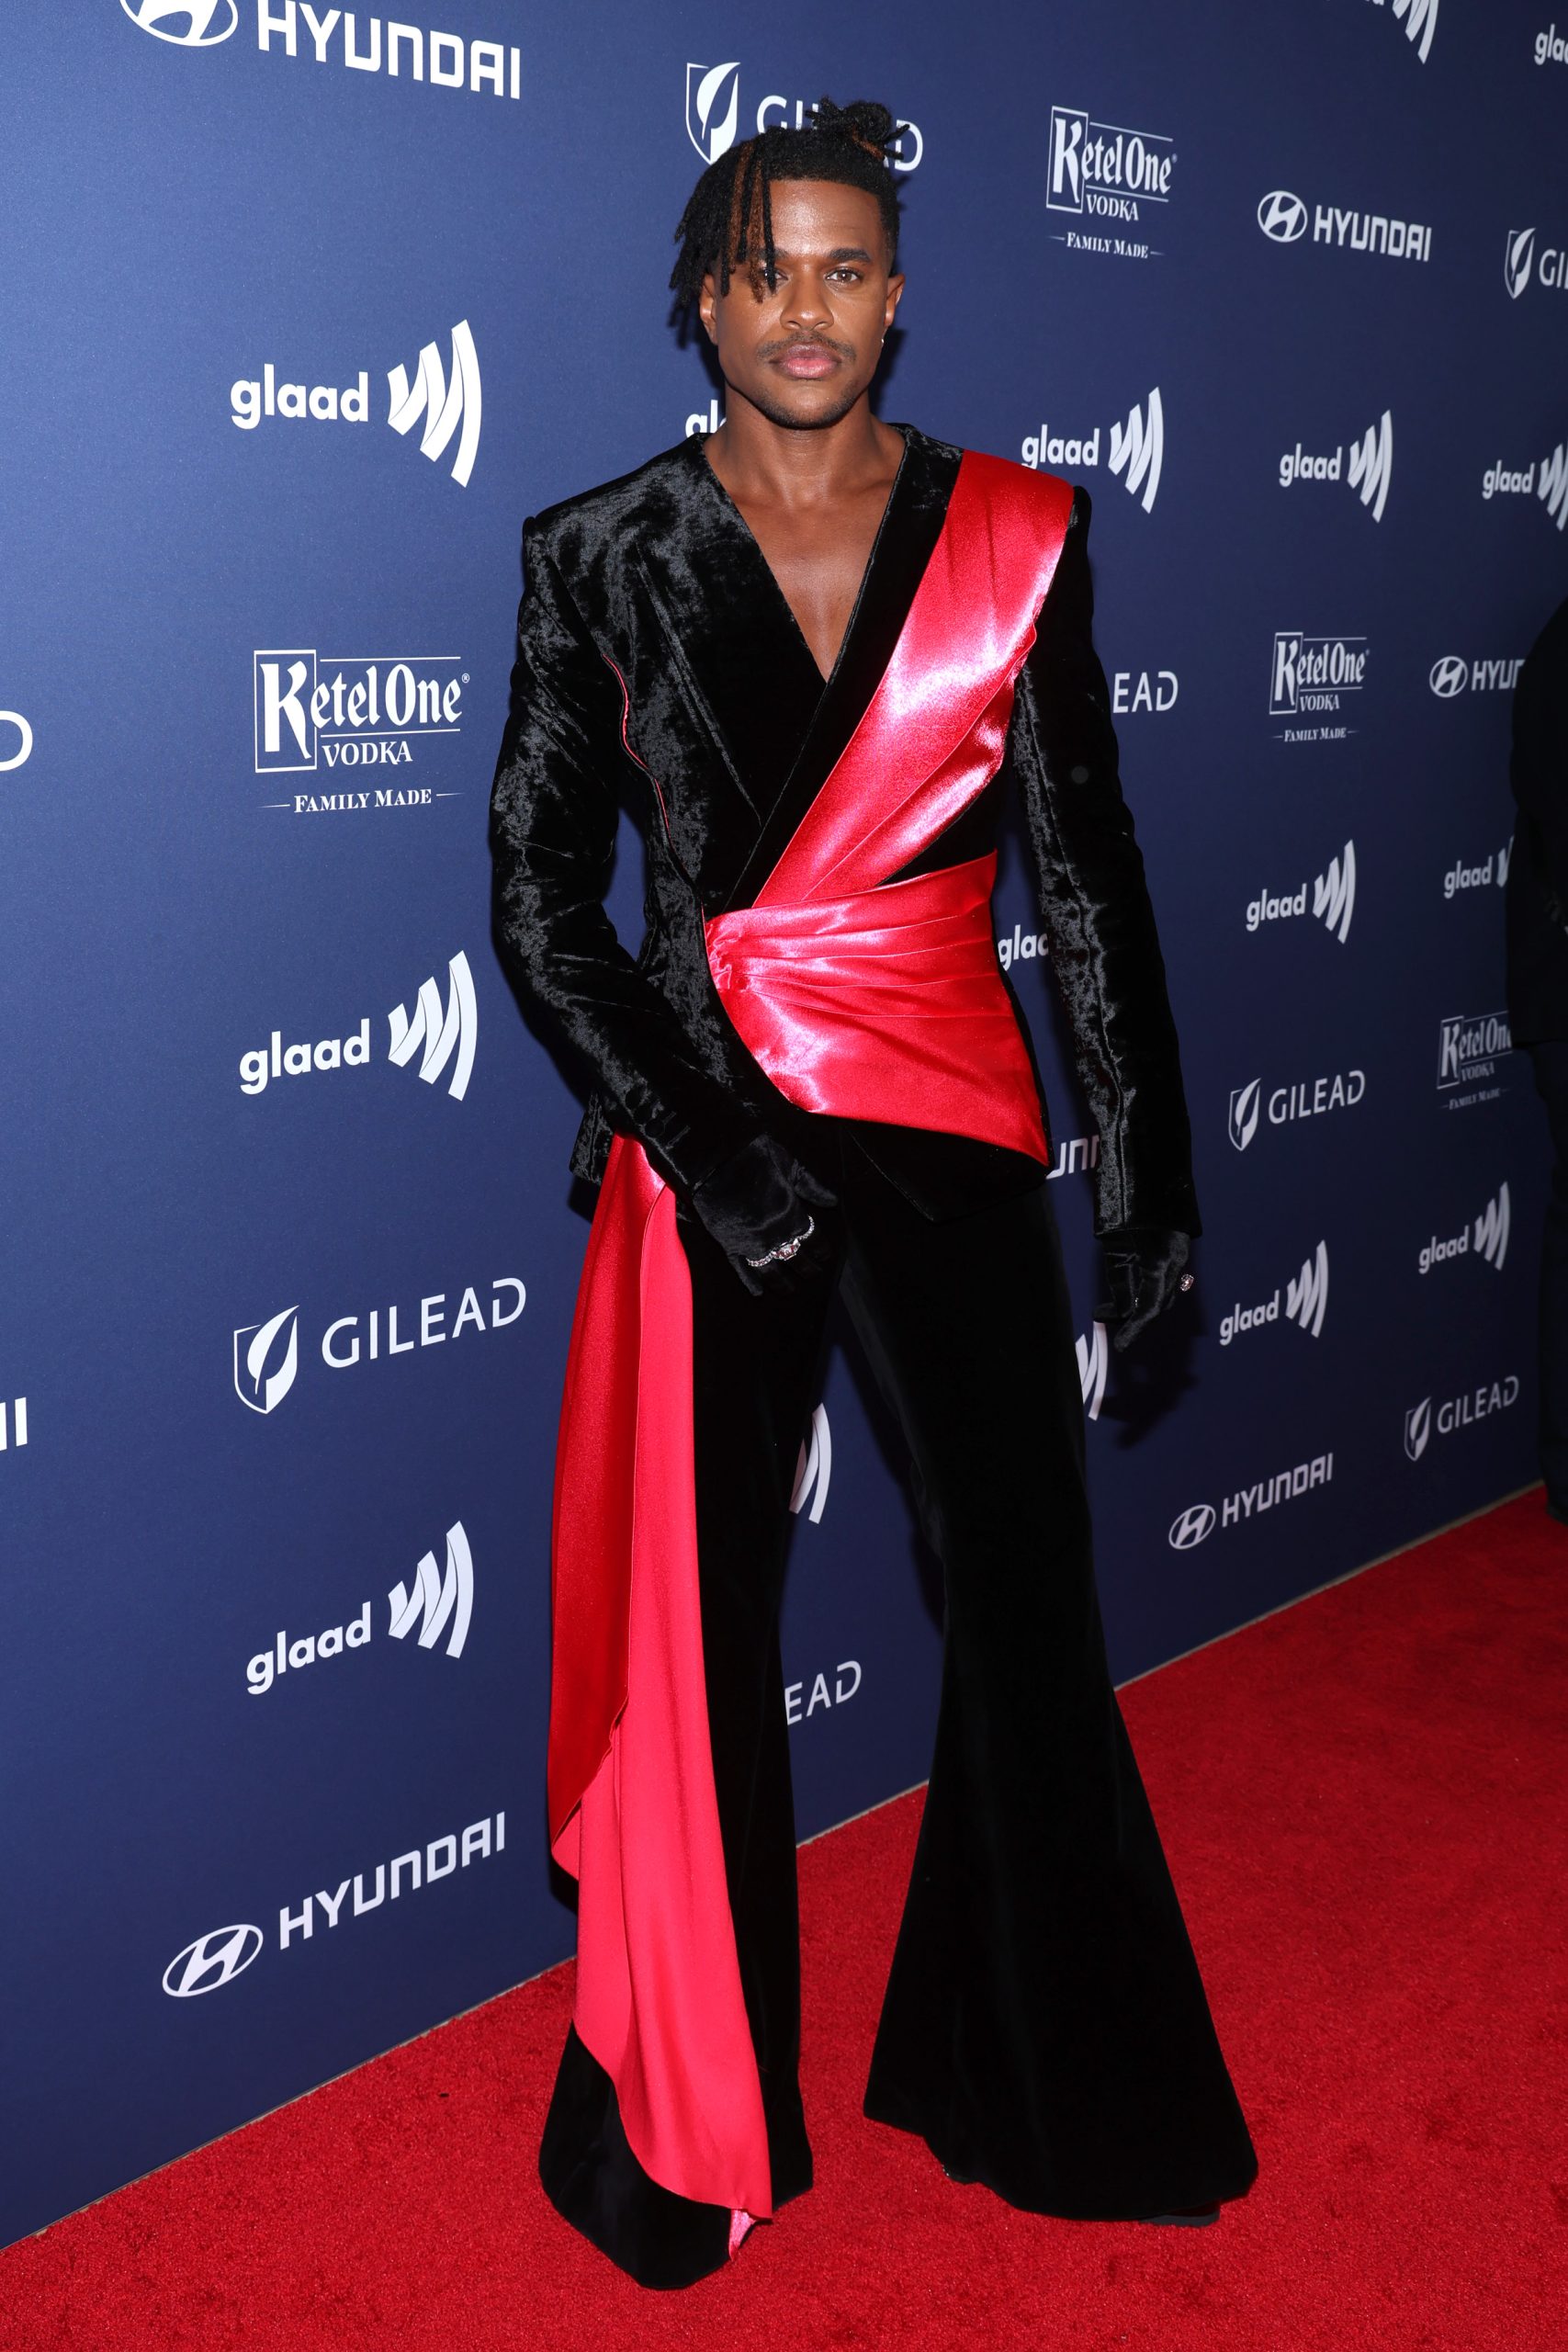 BEVERLY HILLS, CALIFORNIA - MARCH 30: Jeremy Pope attends the 34th Annual GLAAD Media Awards Sponsored by Ketel One Family Made Vodka at The Beverly Hilton on March 30, 2023 in Beverly Hills, California. (Photo by Phillip Faraone/Getty Images for Ketel One)